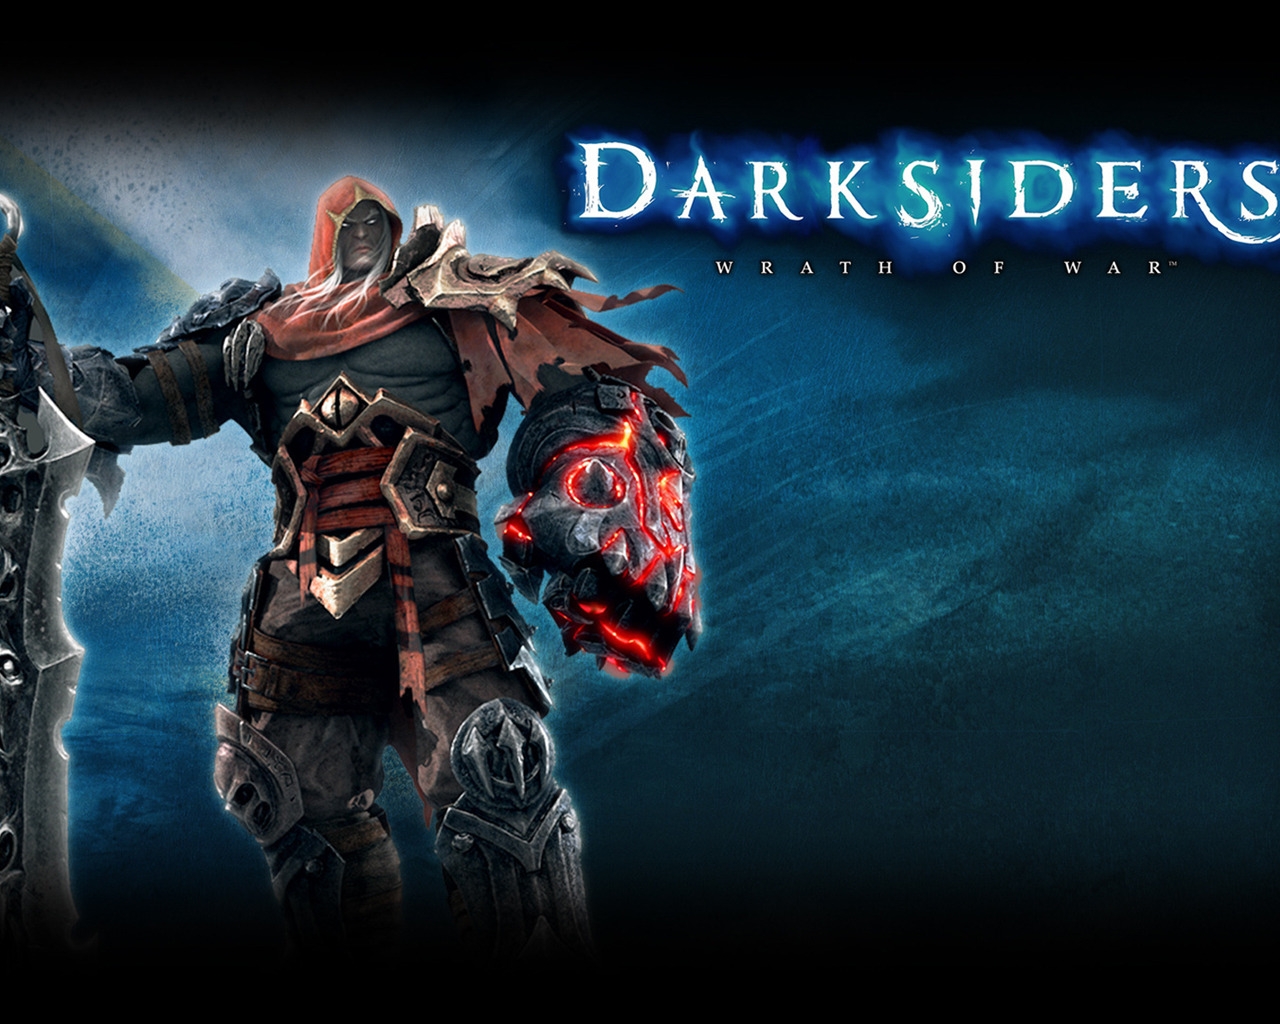 Darksiders Wrath of War Character for 1280 x 1024 resolution